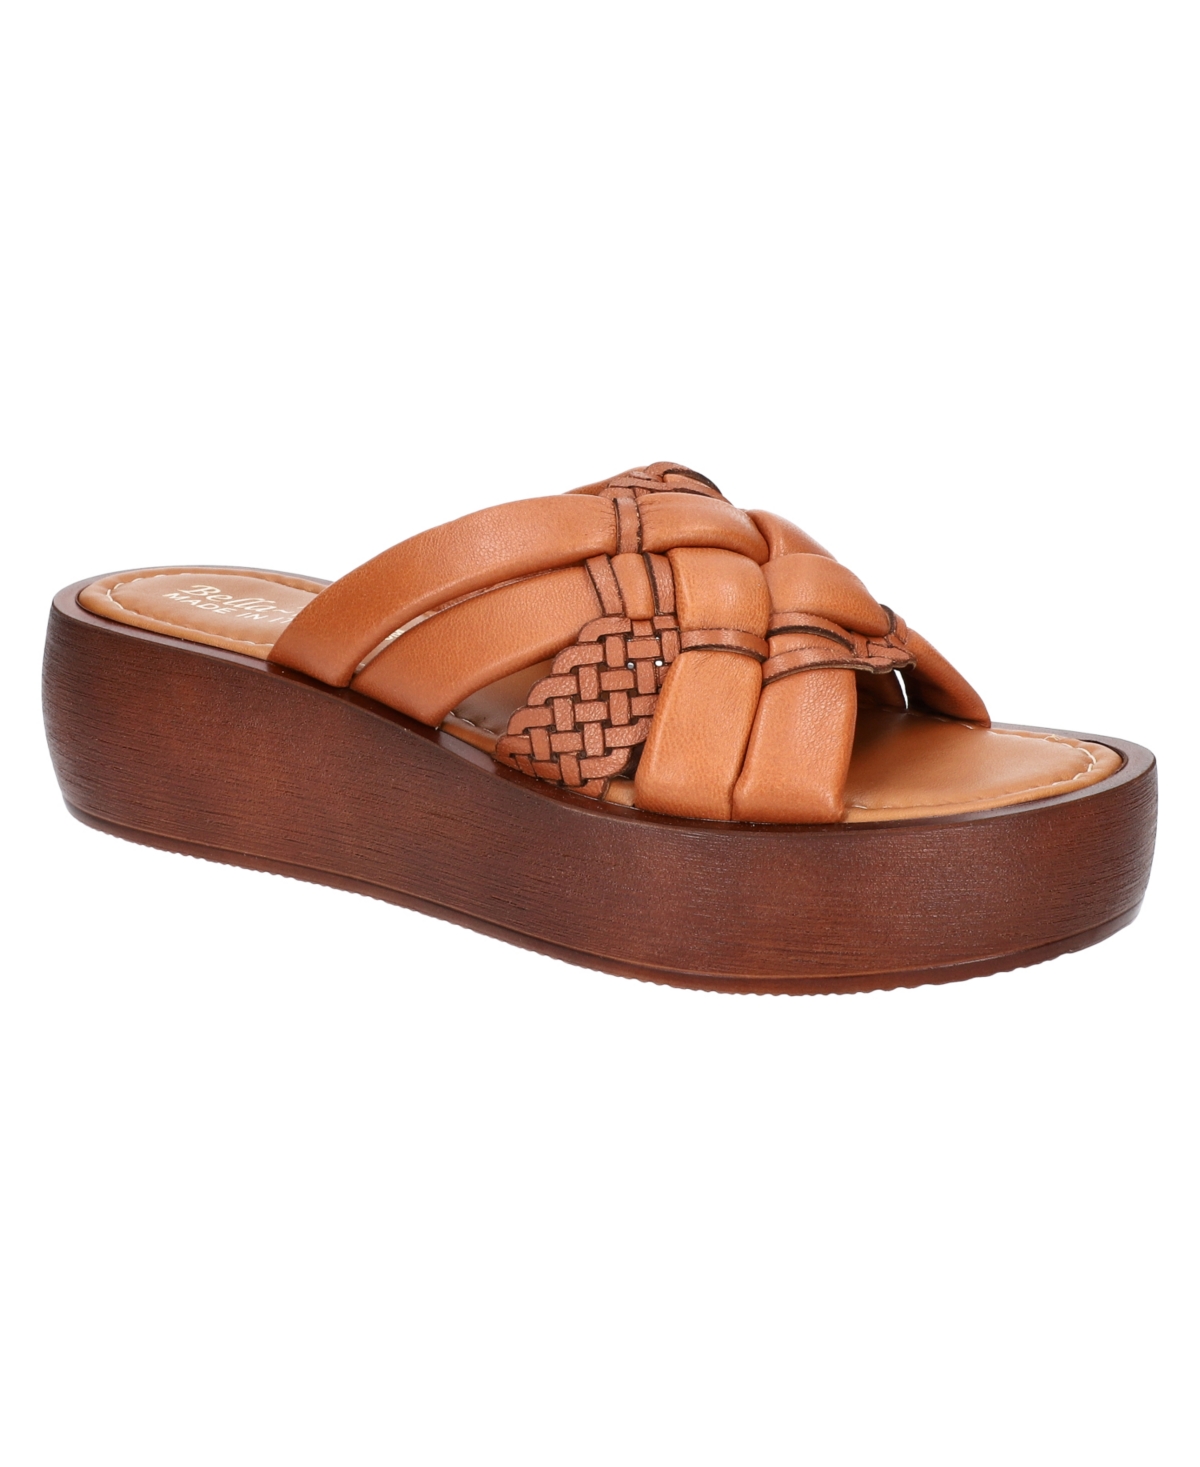 Women's Ned-Italy Platform Sandals - Nude Leather